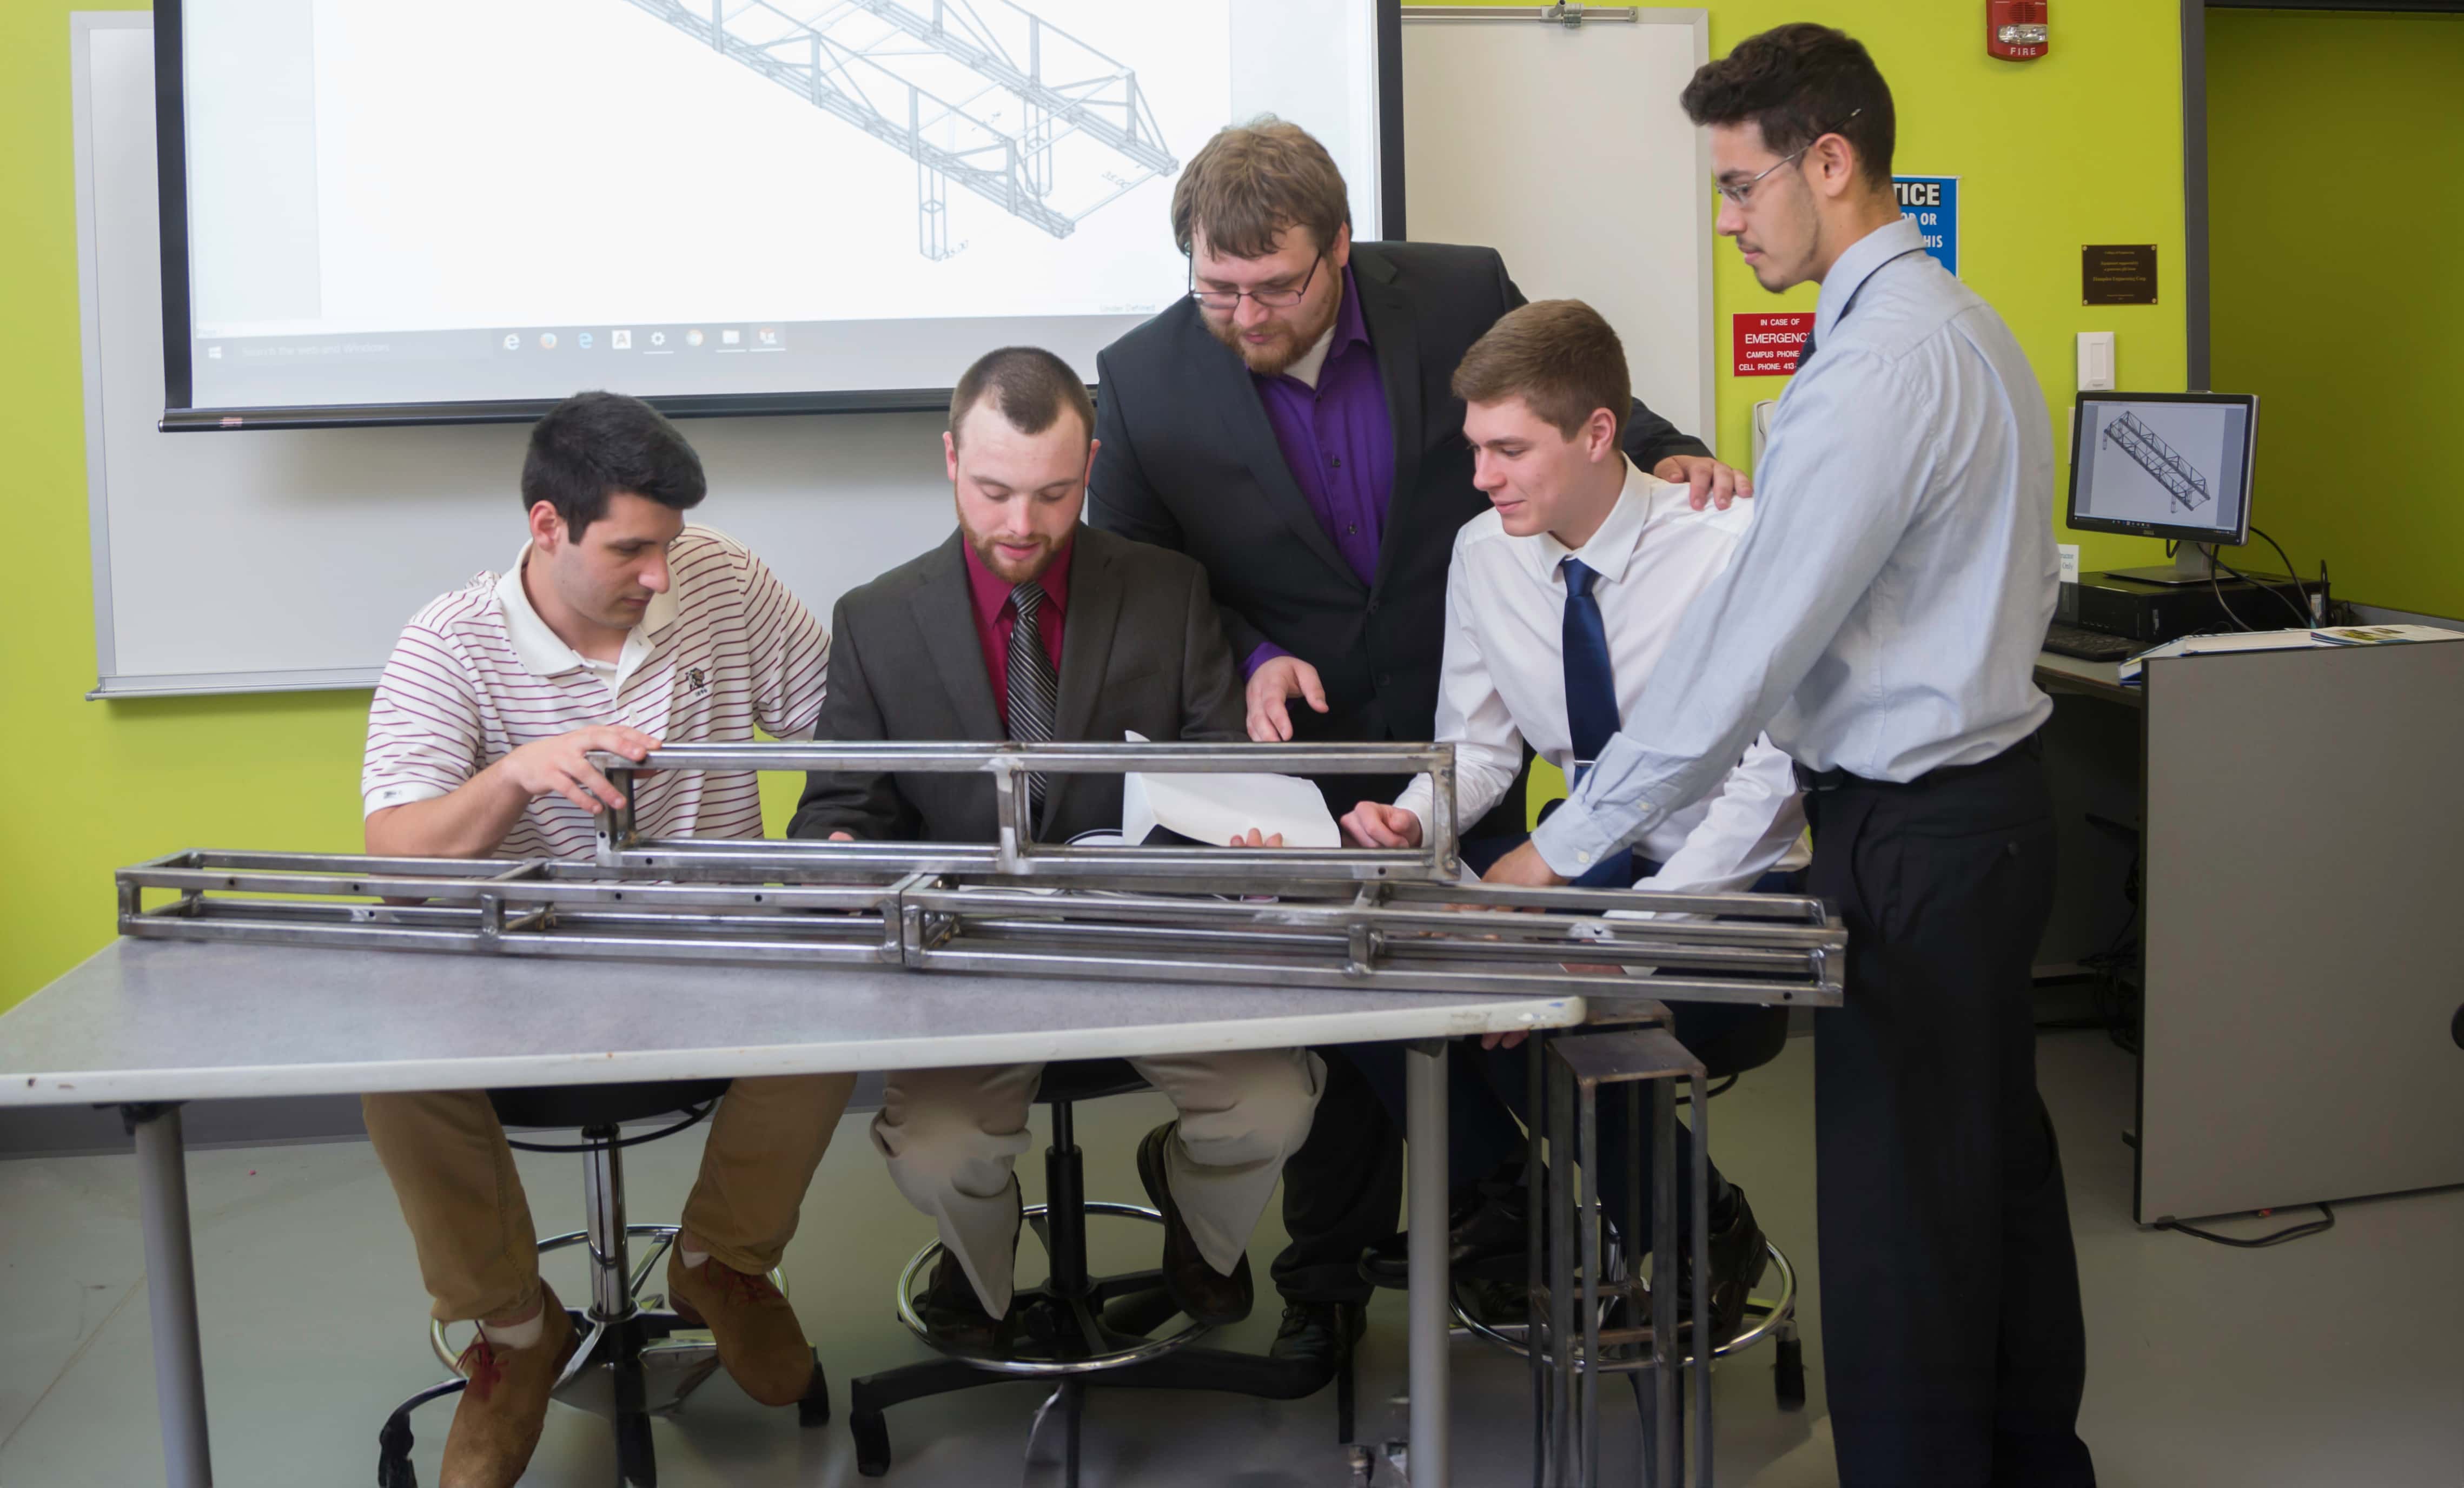 Civil Engineering students working on a project